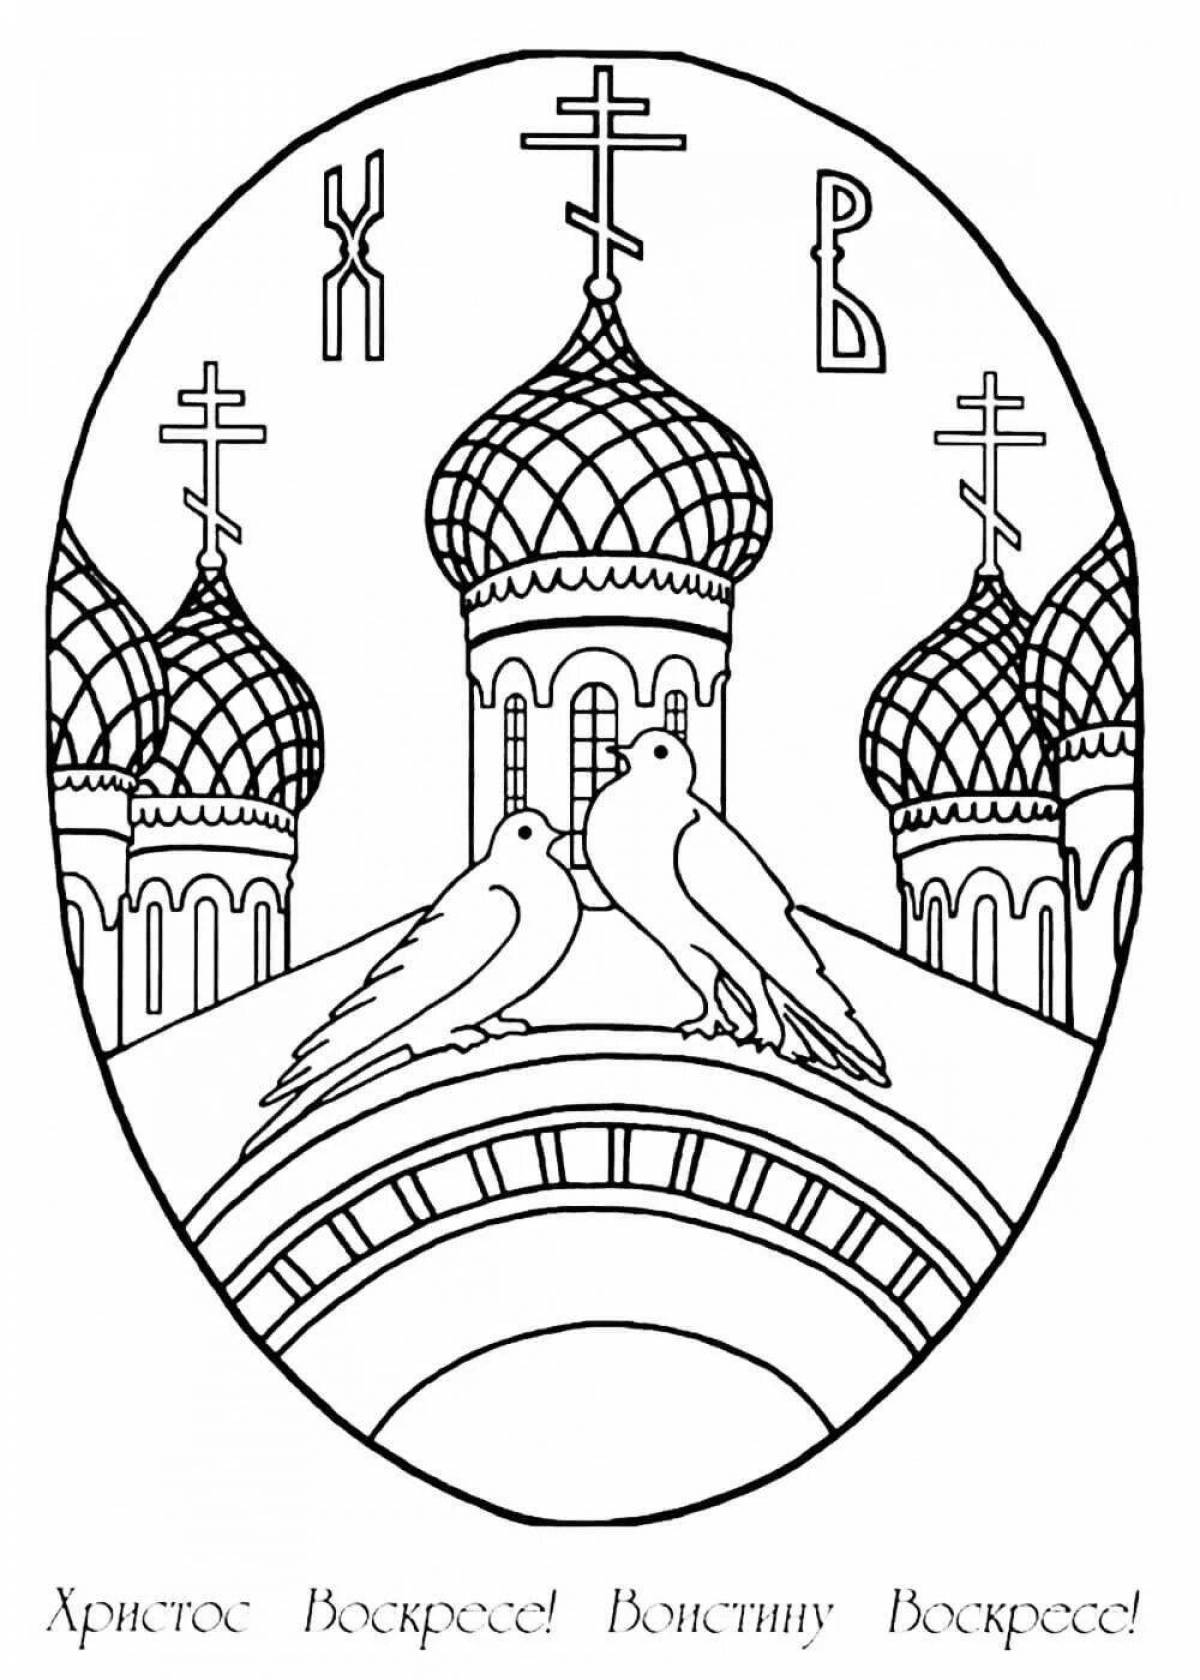 Fun coloring pages with Easter symbols